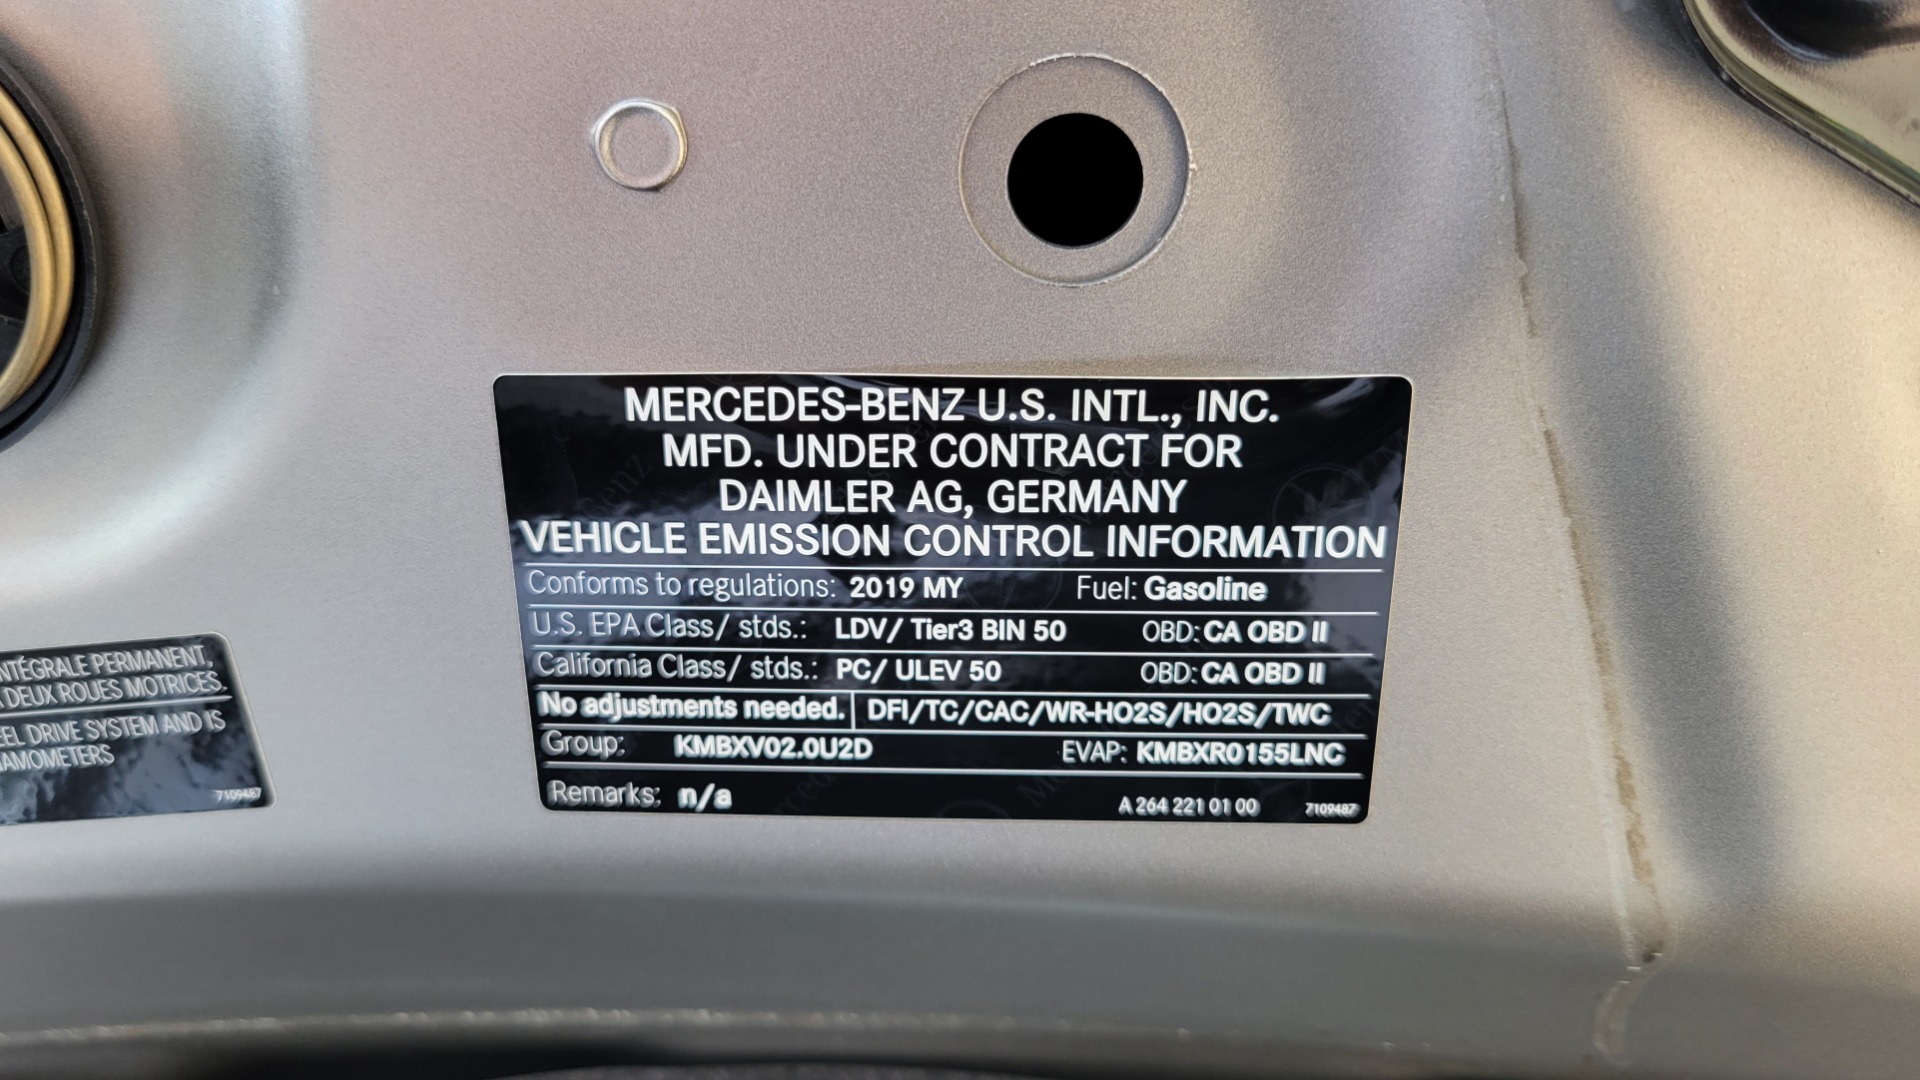 Used 2019 Mercedes-Benz C-CLASS C 300 PREMIUM 4MATIC / BURMESTER / KEYLESS-GO / REARVIEW for sale Sold at Formula Imports in Charlotte NC 28227 13